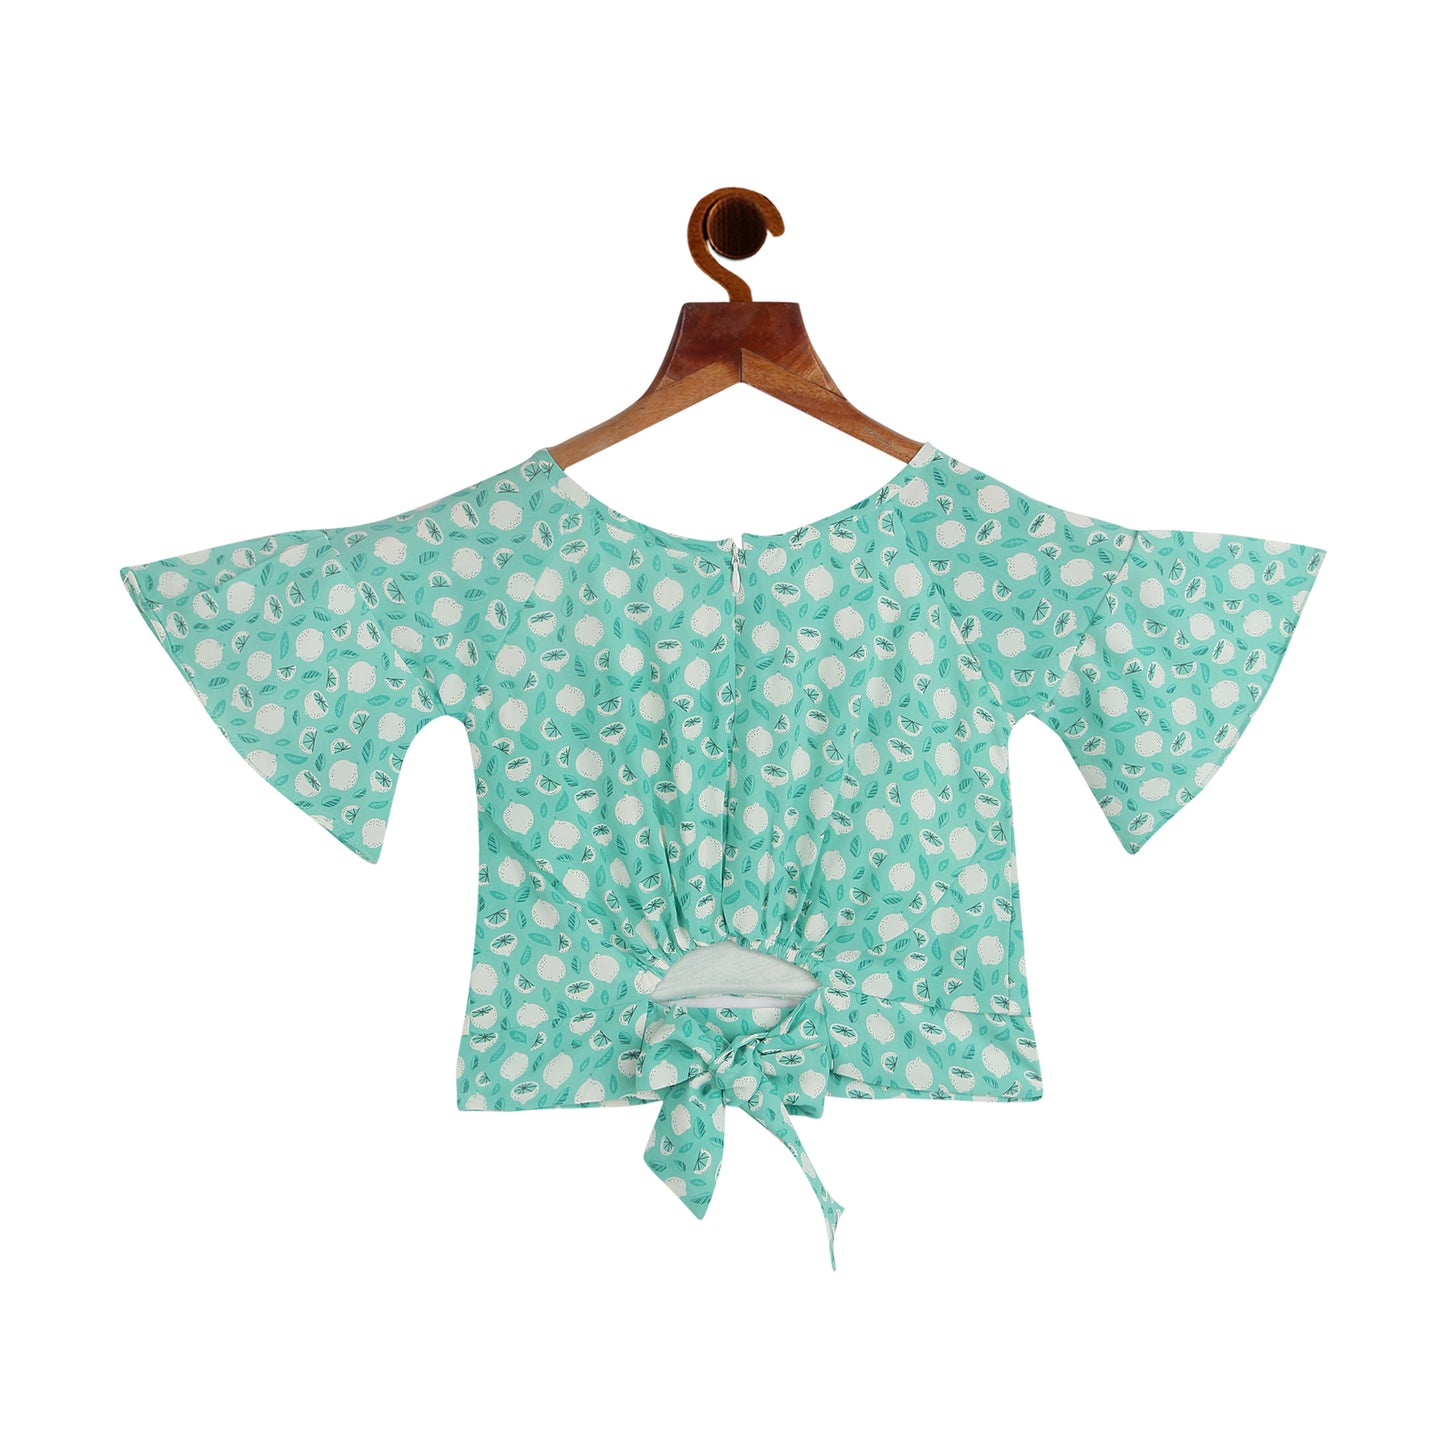 Green Print Half Sleeve Top With Back Tie-Up Bow